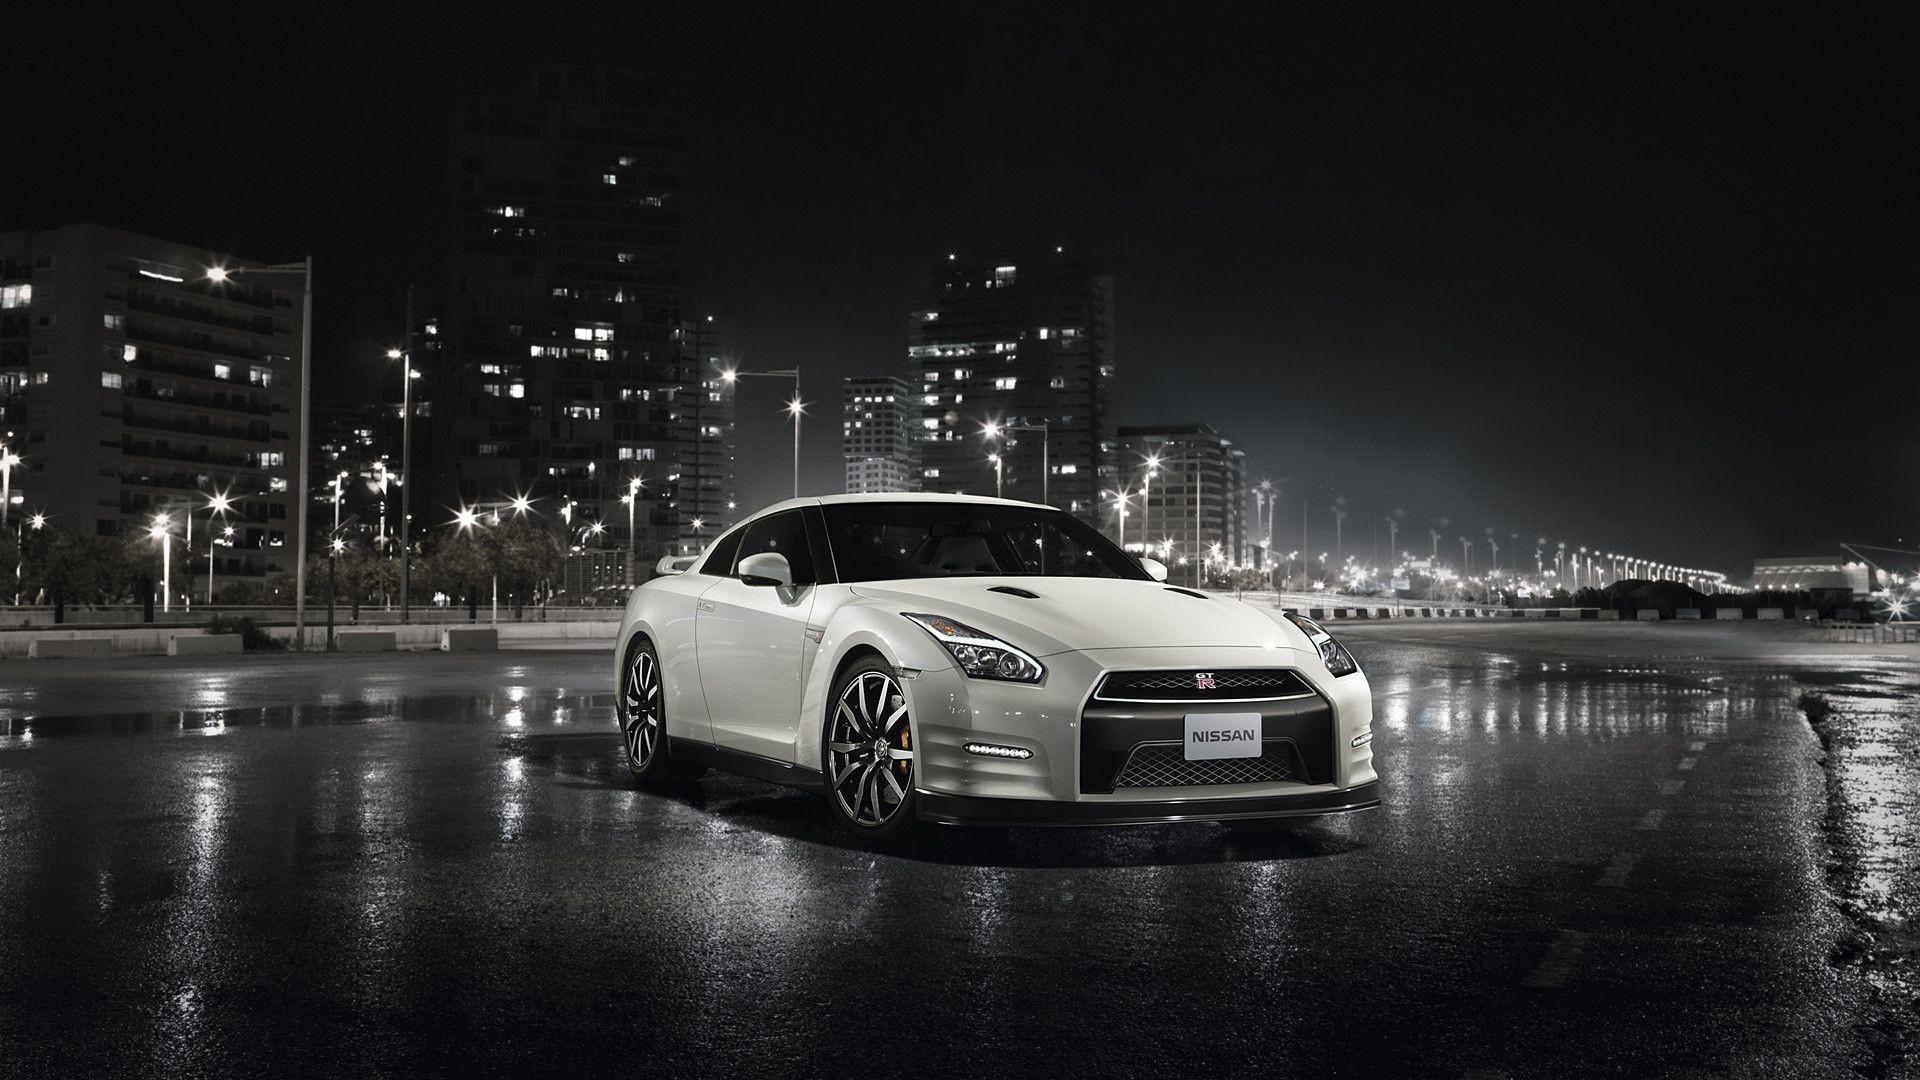 Gtr Wallpaper background picture